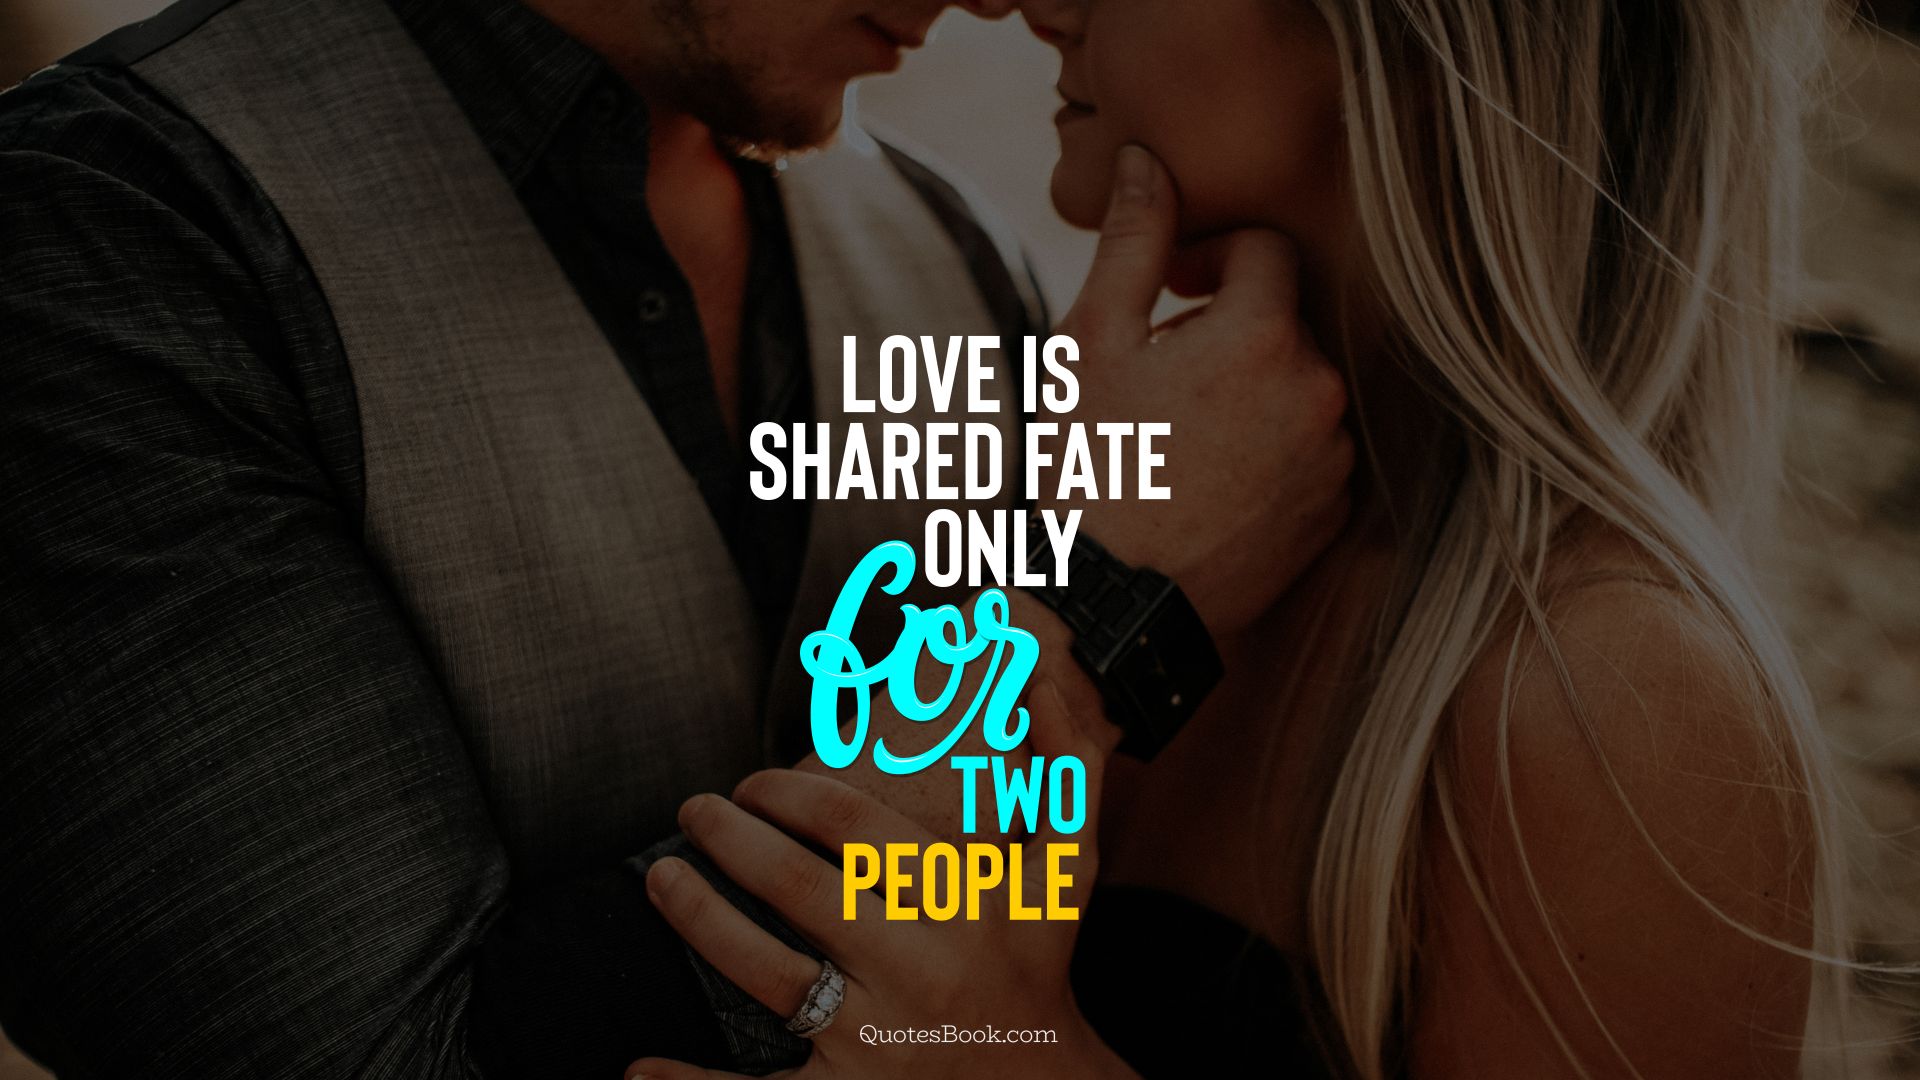 Love is shared fate only for two people. - Quote by QuotesBook